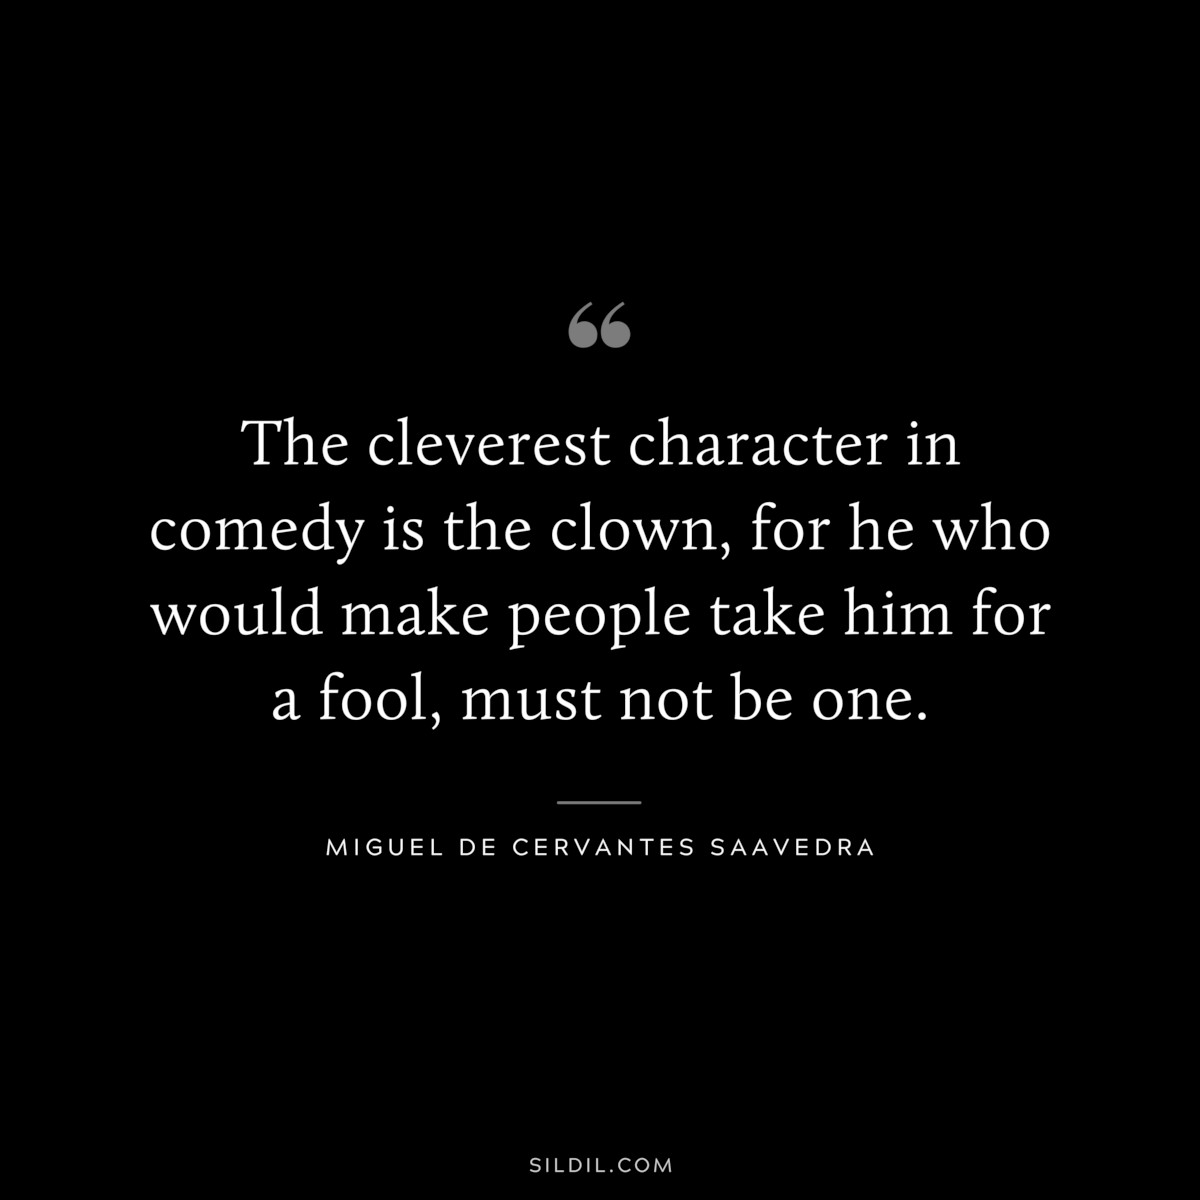 The cleverest character in comedy is the clown, for he who would make people take him for a fool, must not be one. ― Miguel de Cervantes Saavedra